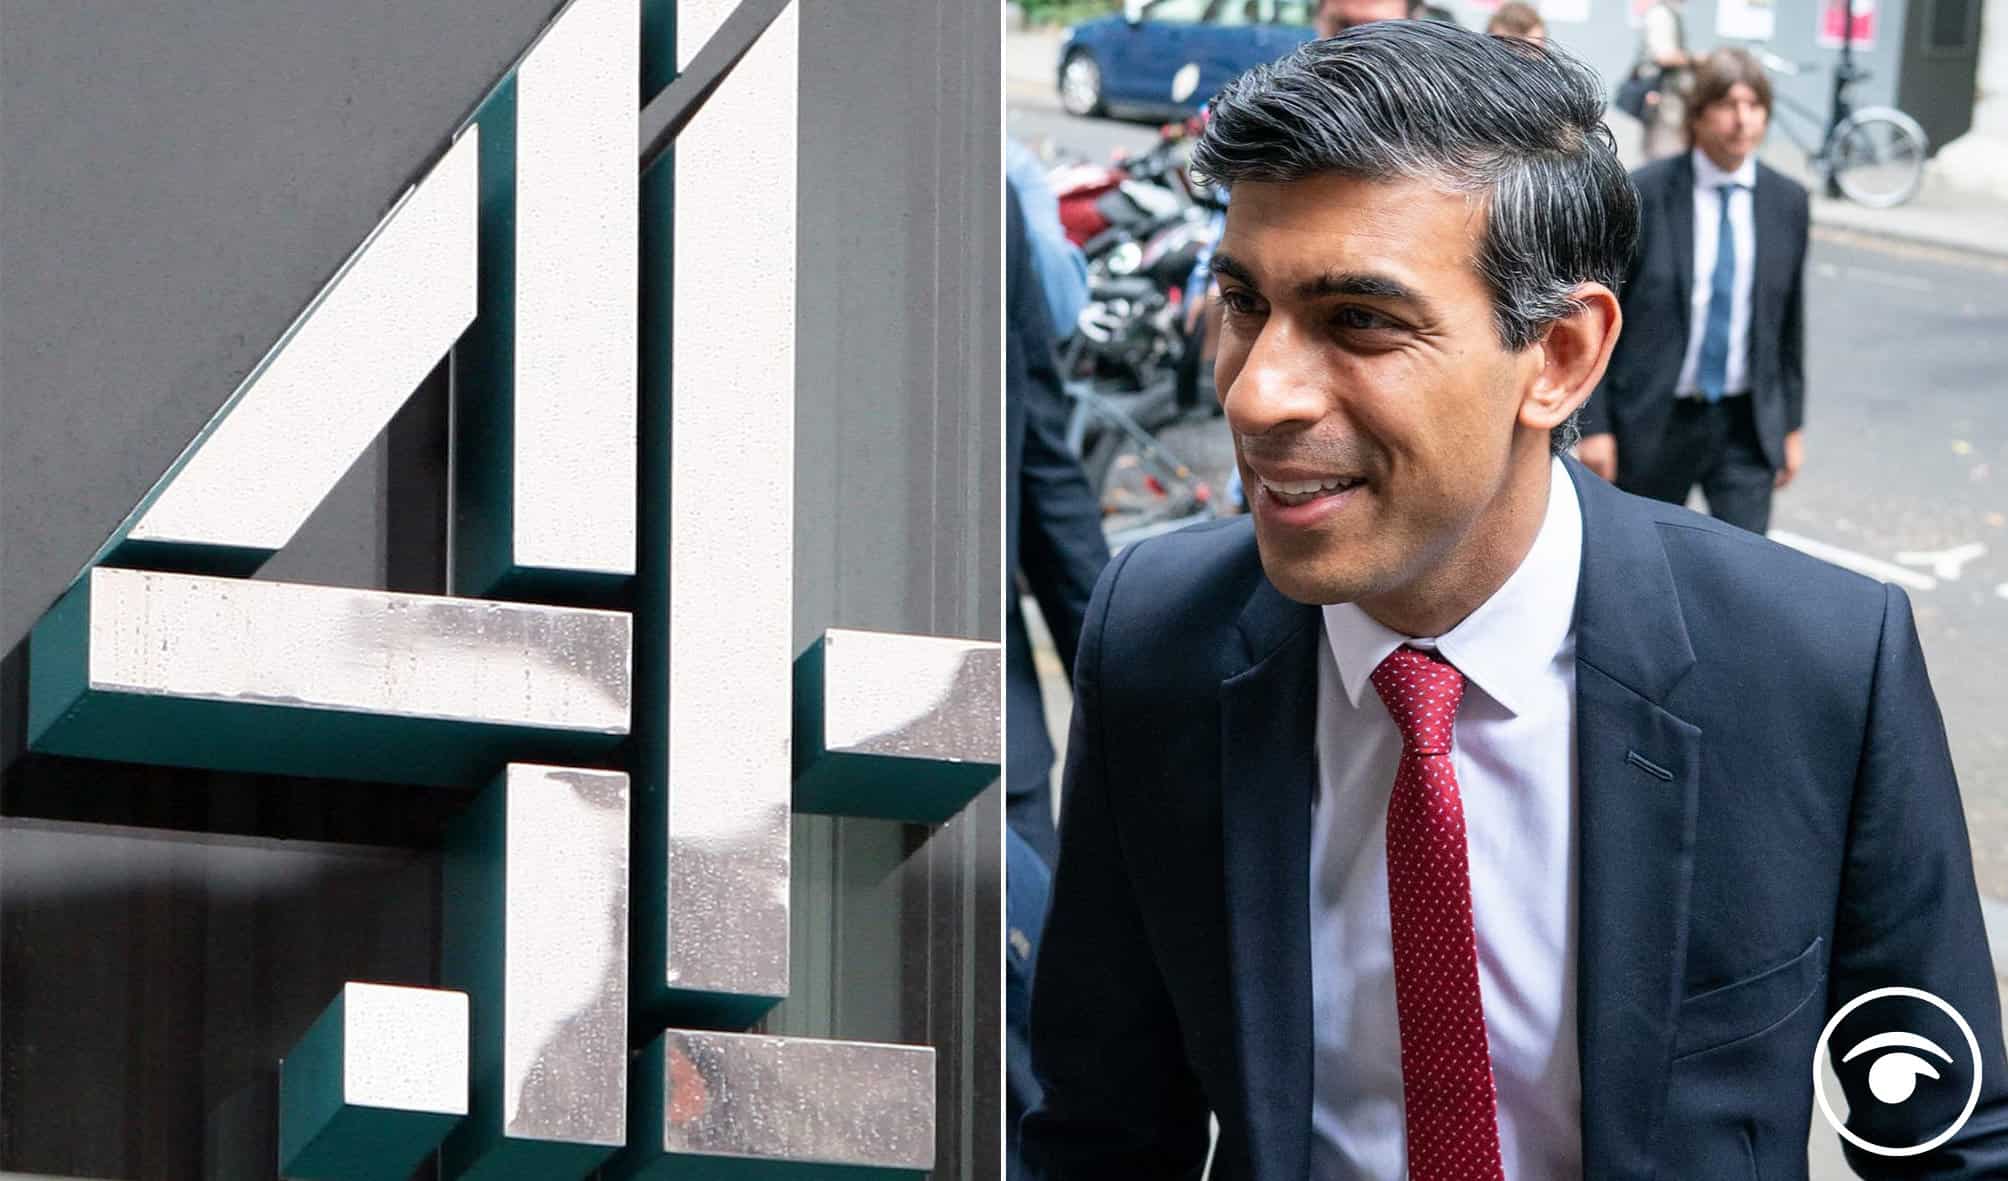 Sunak compared to former PM as he vows to privatise Channel 4 – reaction